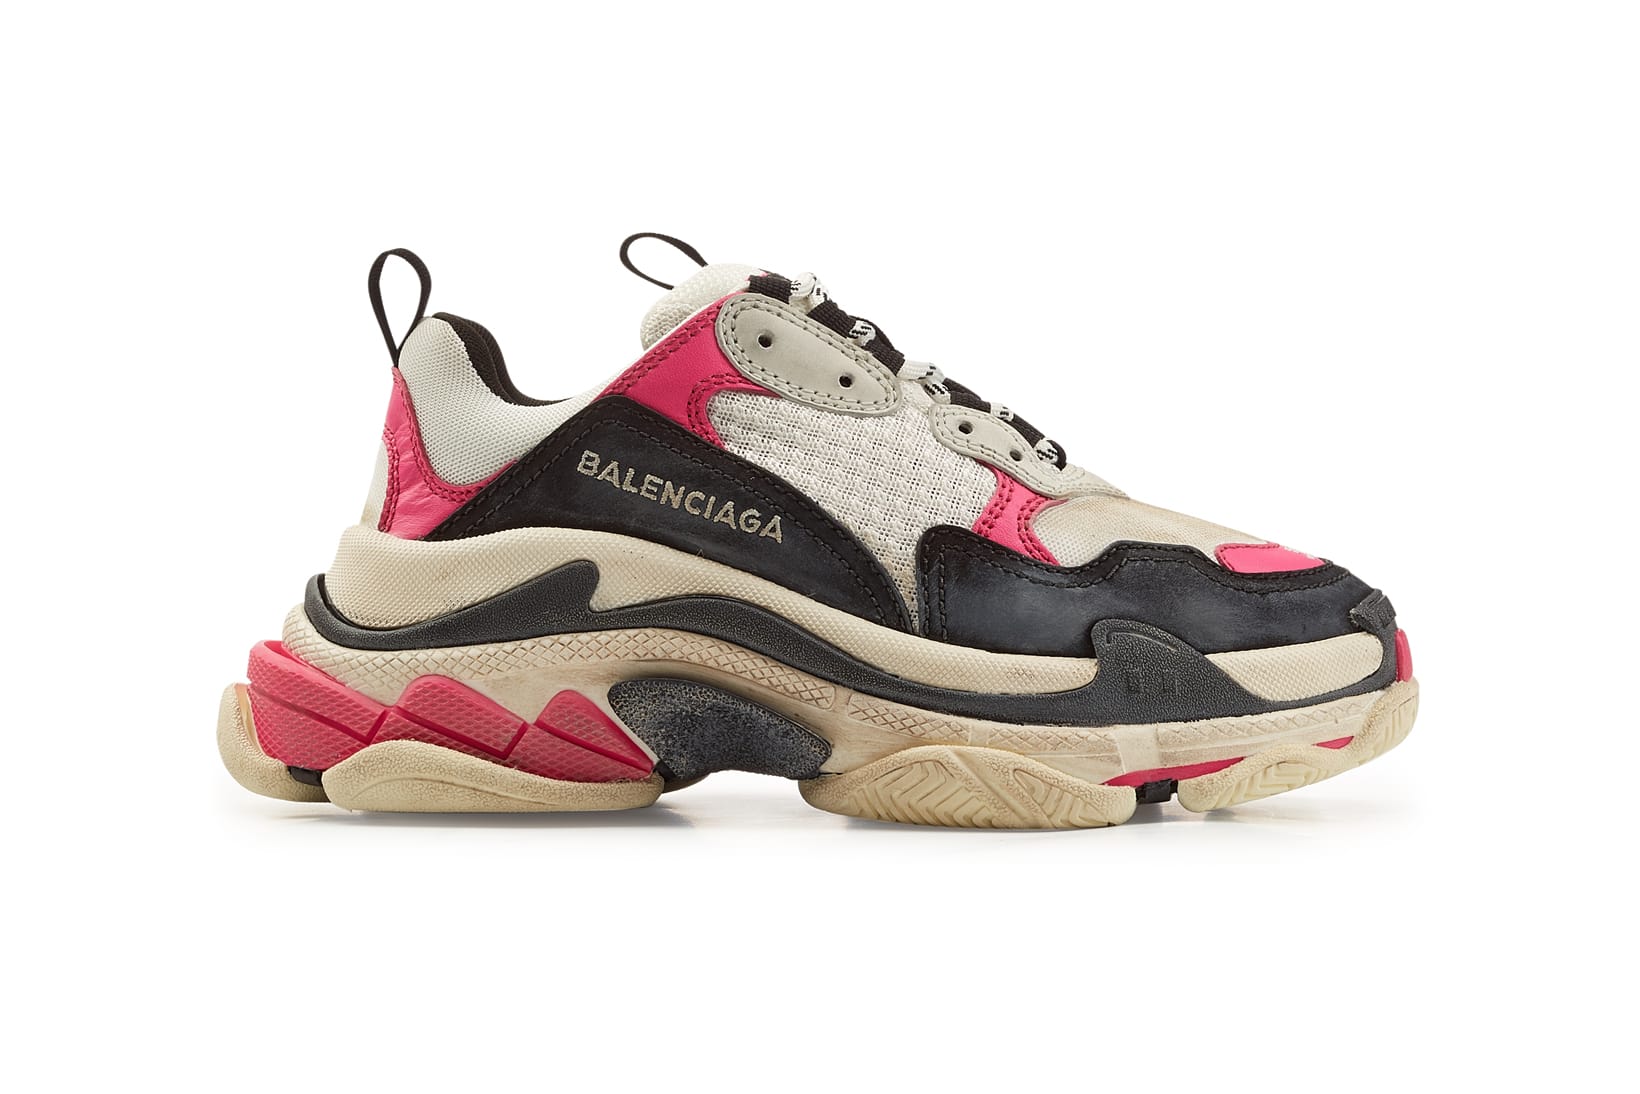 Balenciaga Triple S low top trainers liked on Polyvore see